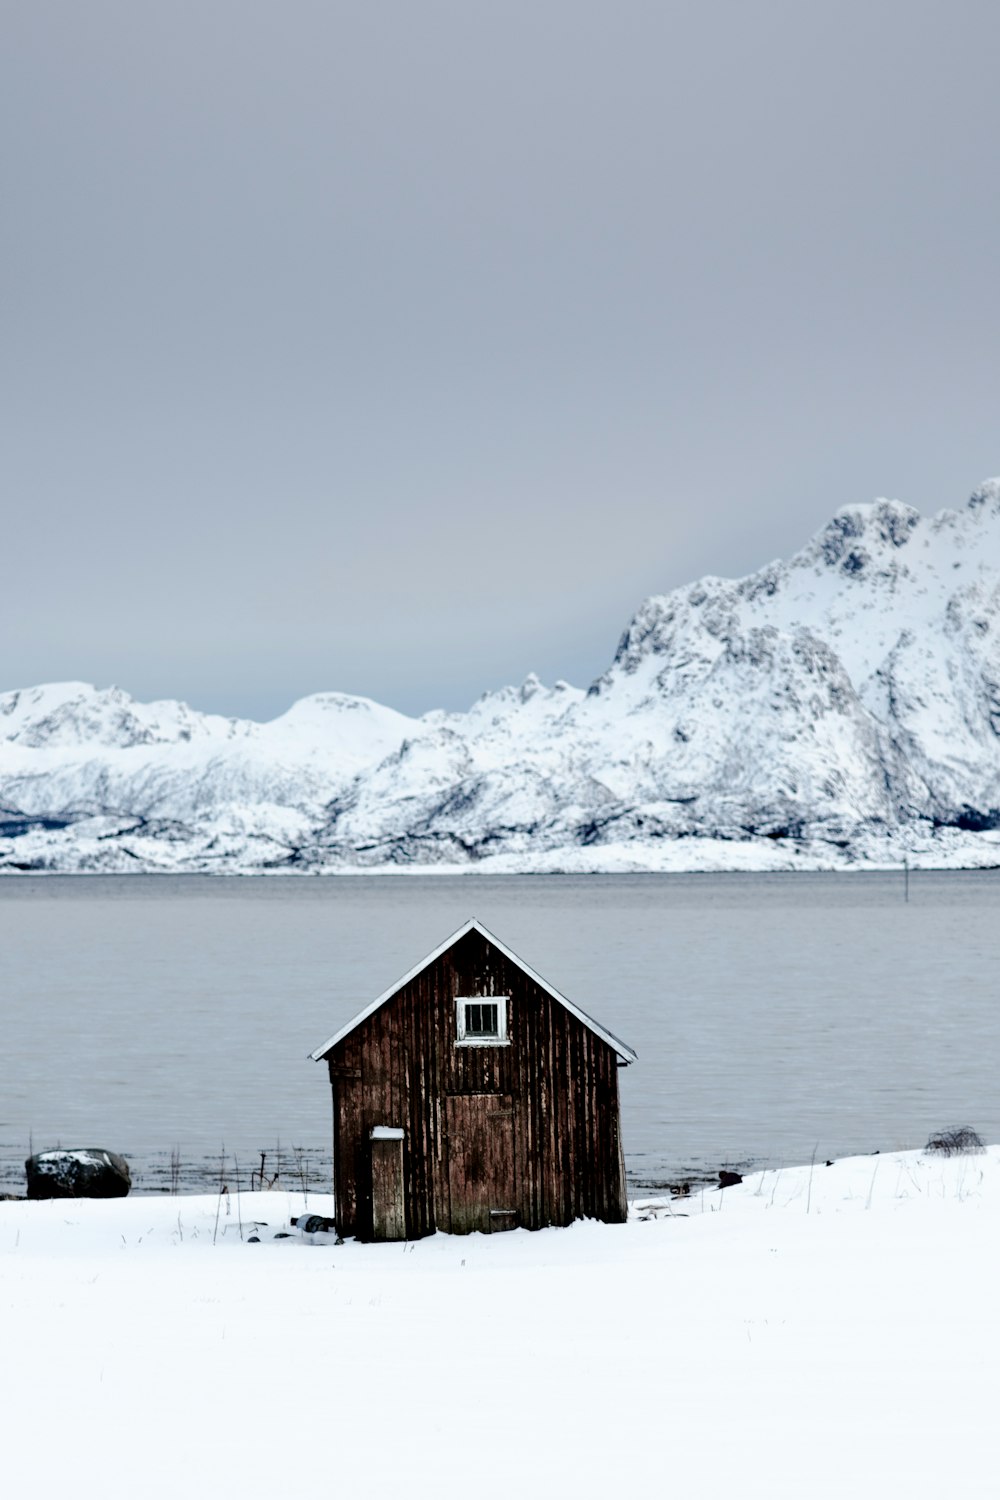 brown wooden shed near lake surrounded by snow